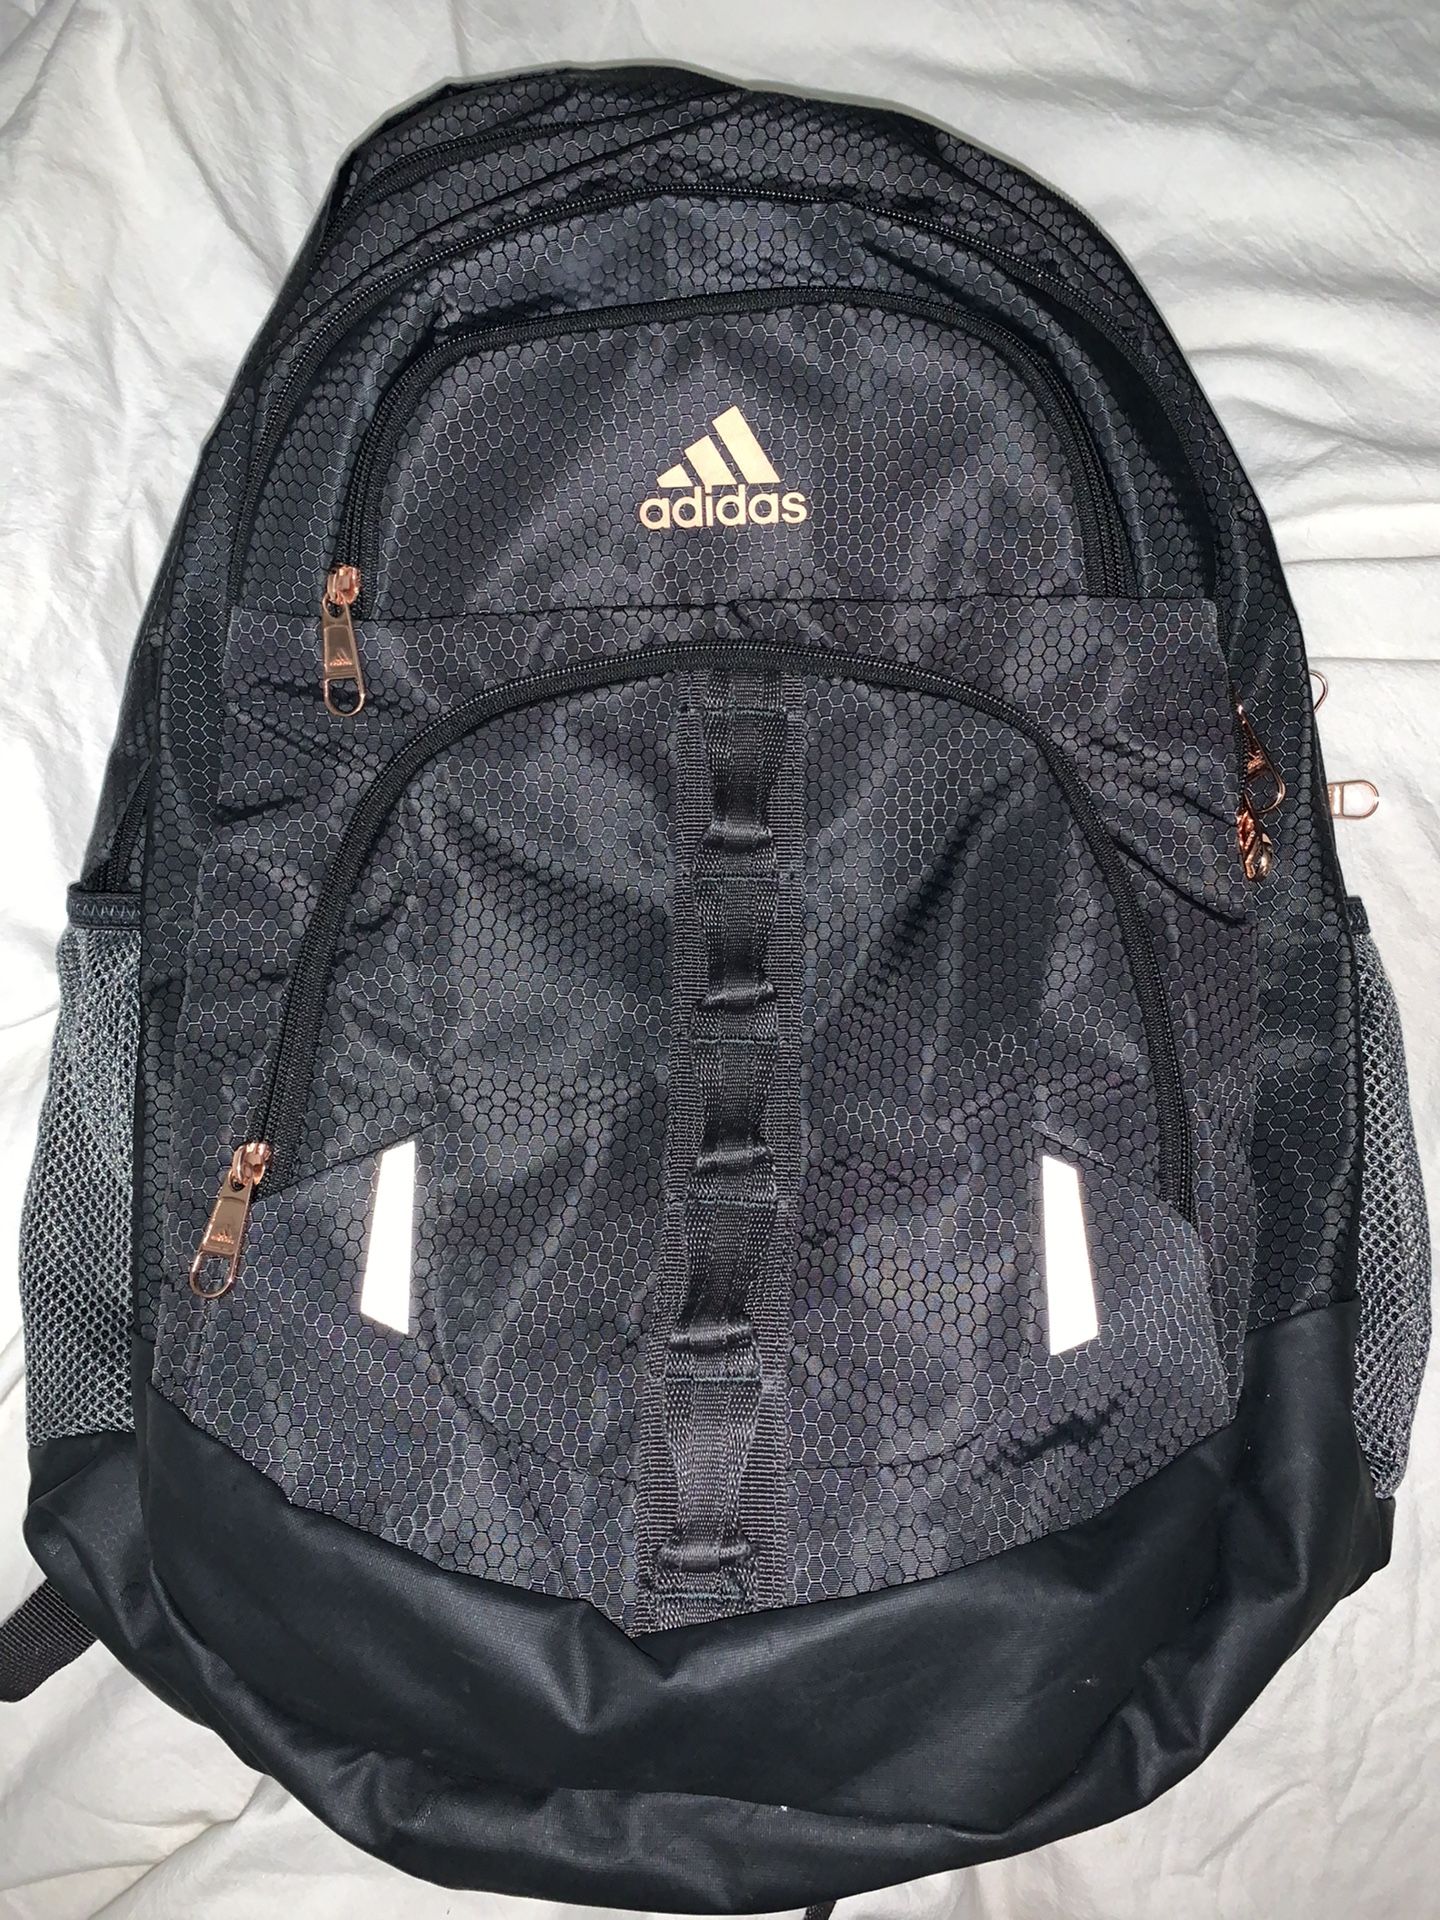 New Adidas Backpack with laptop pocket inside